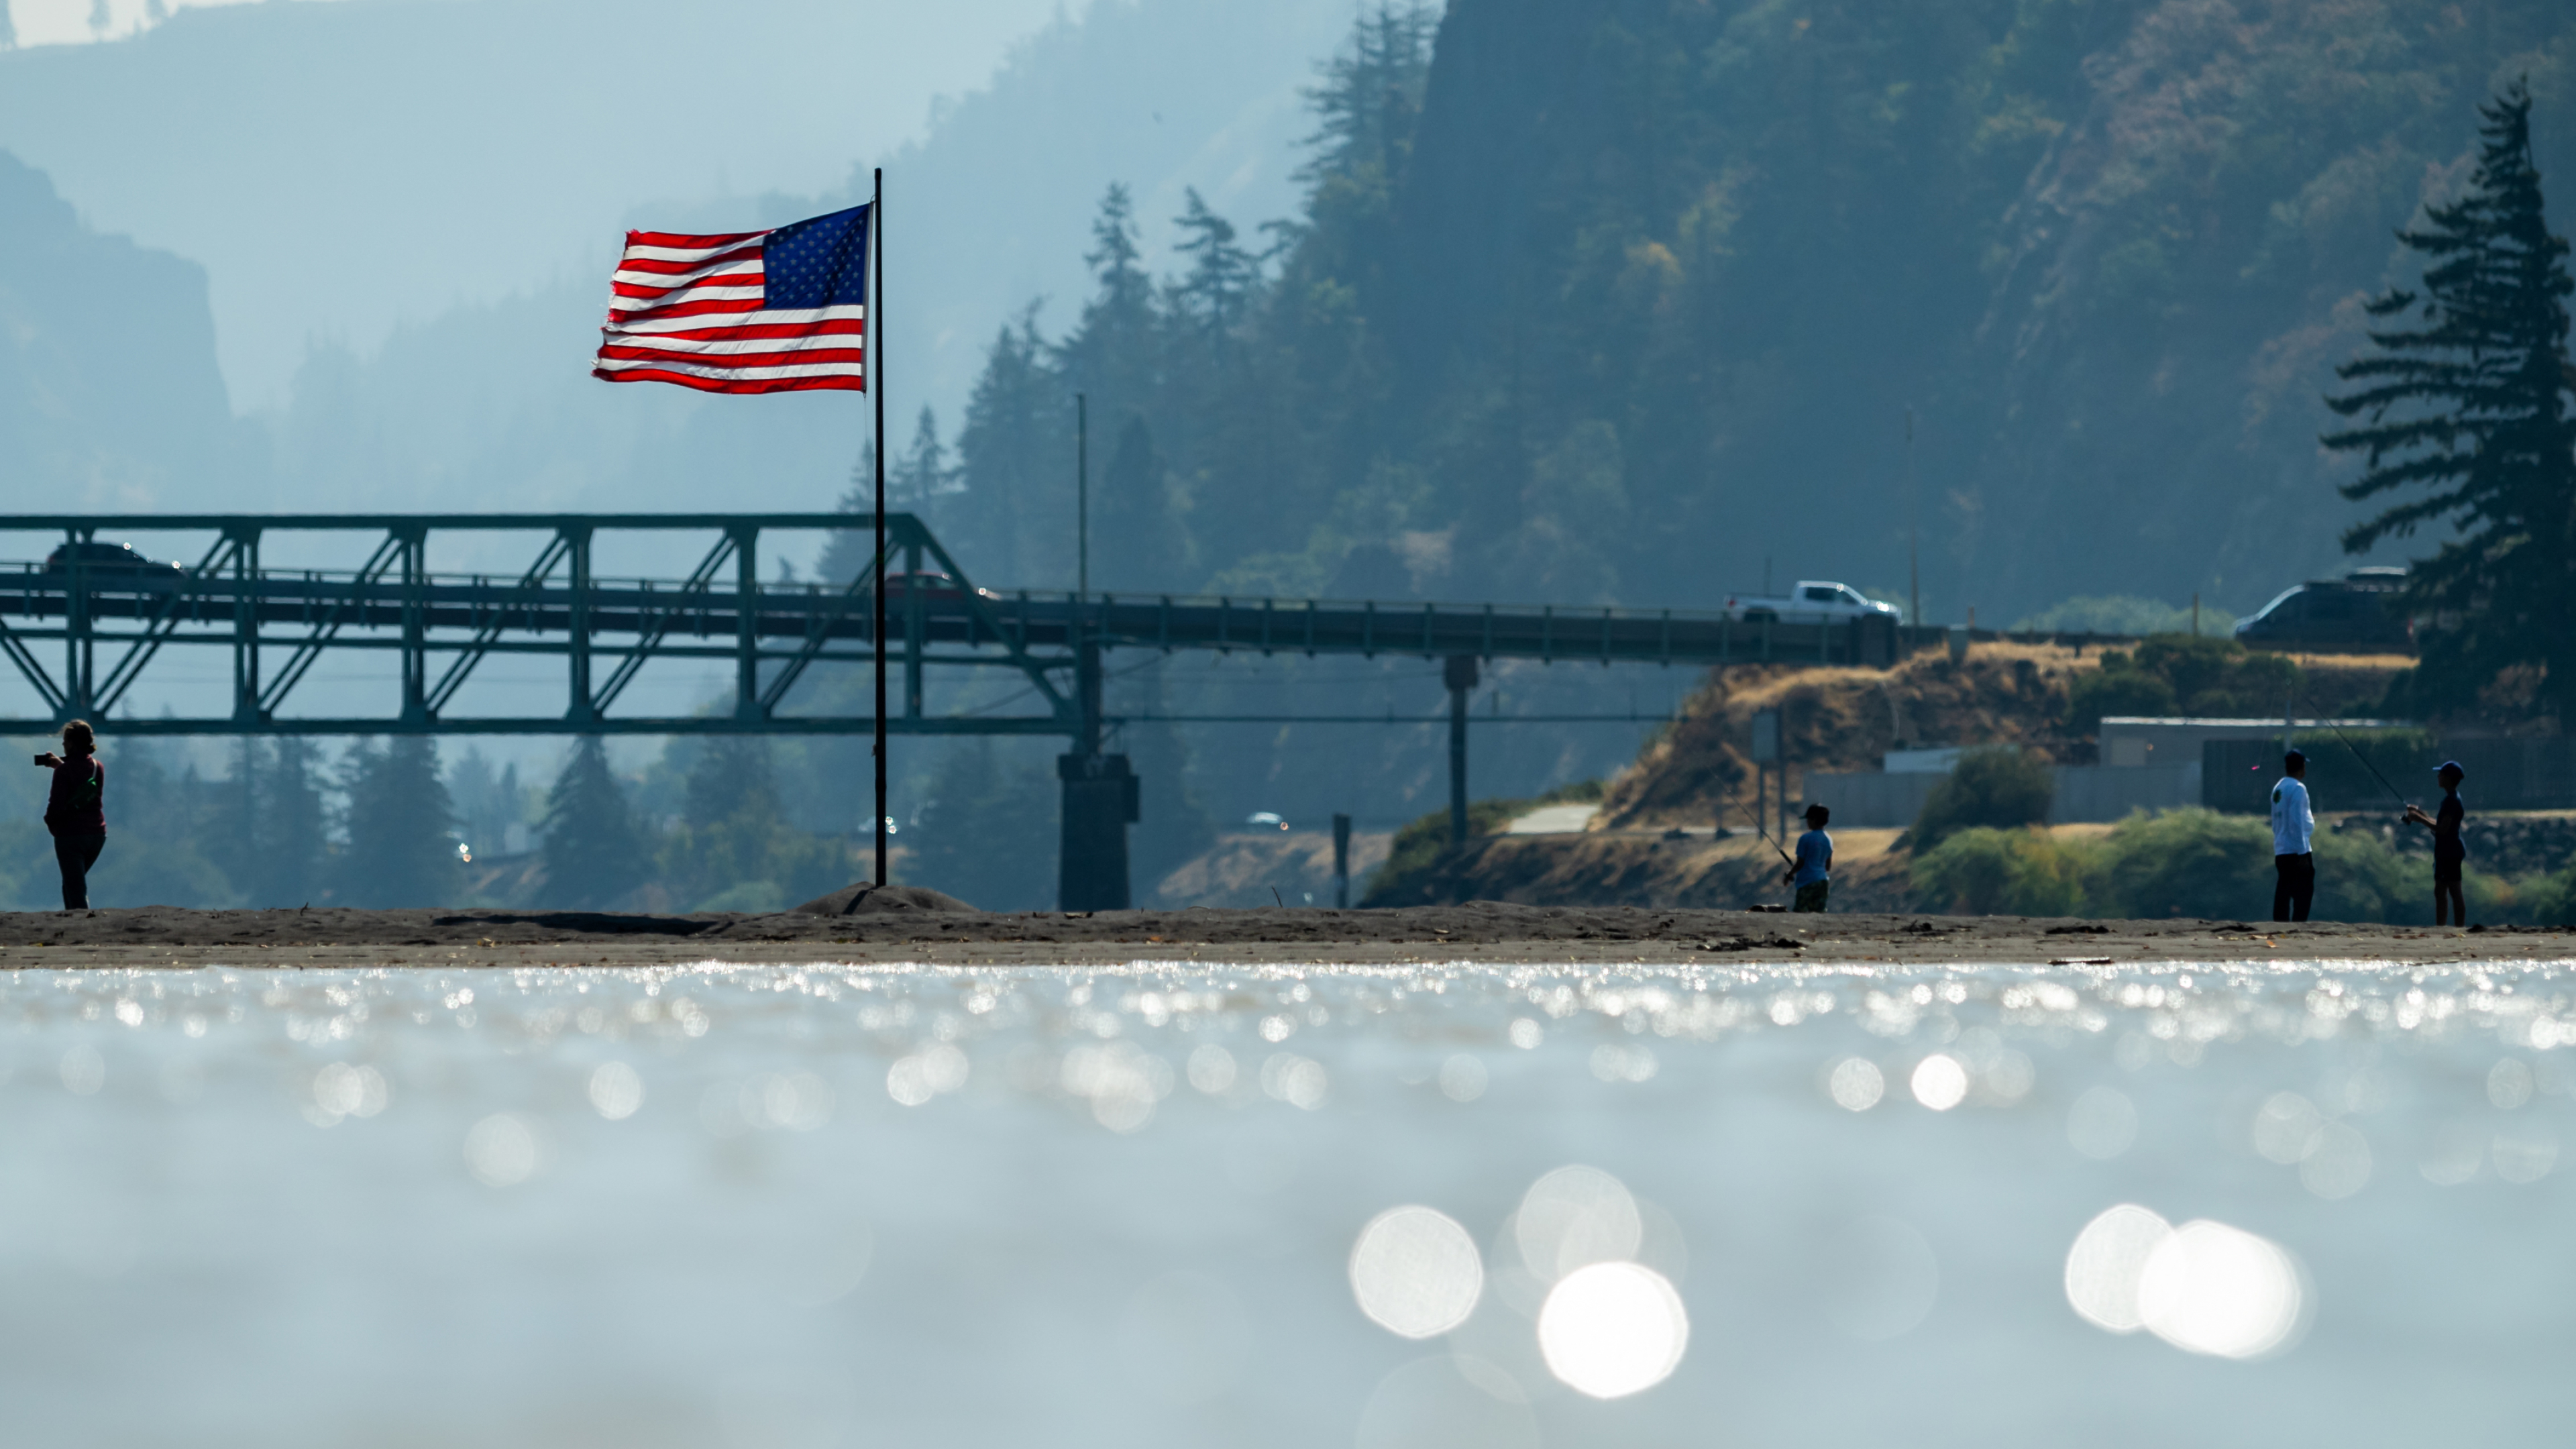 An American flag flying at the Marina. Home of the park.